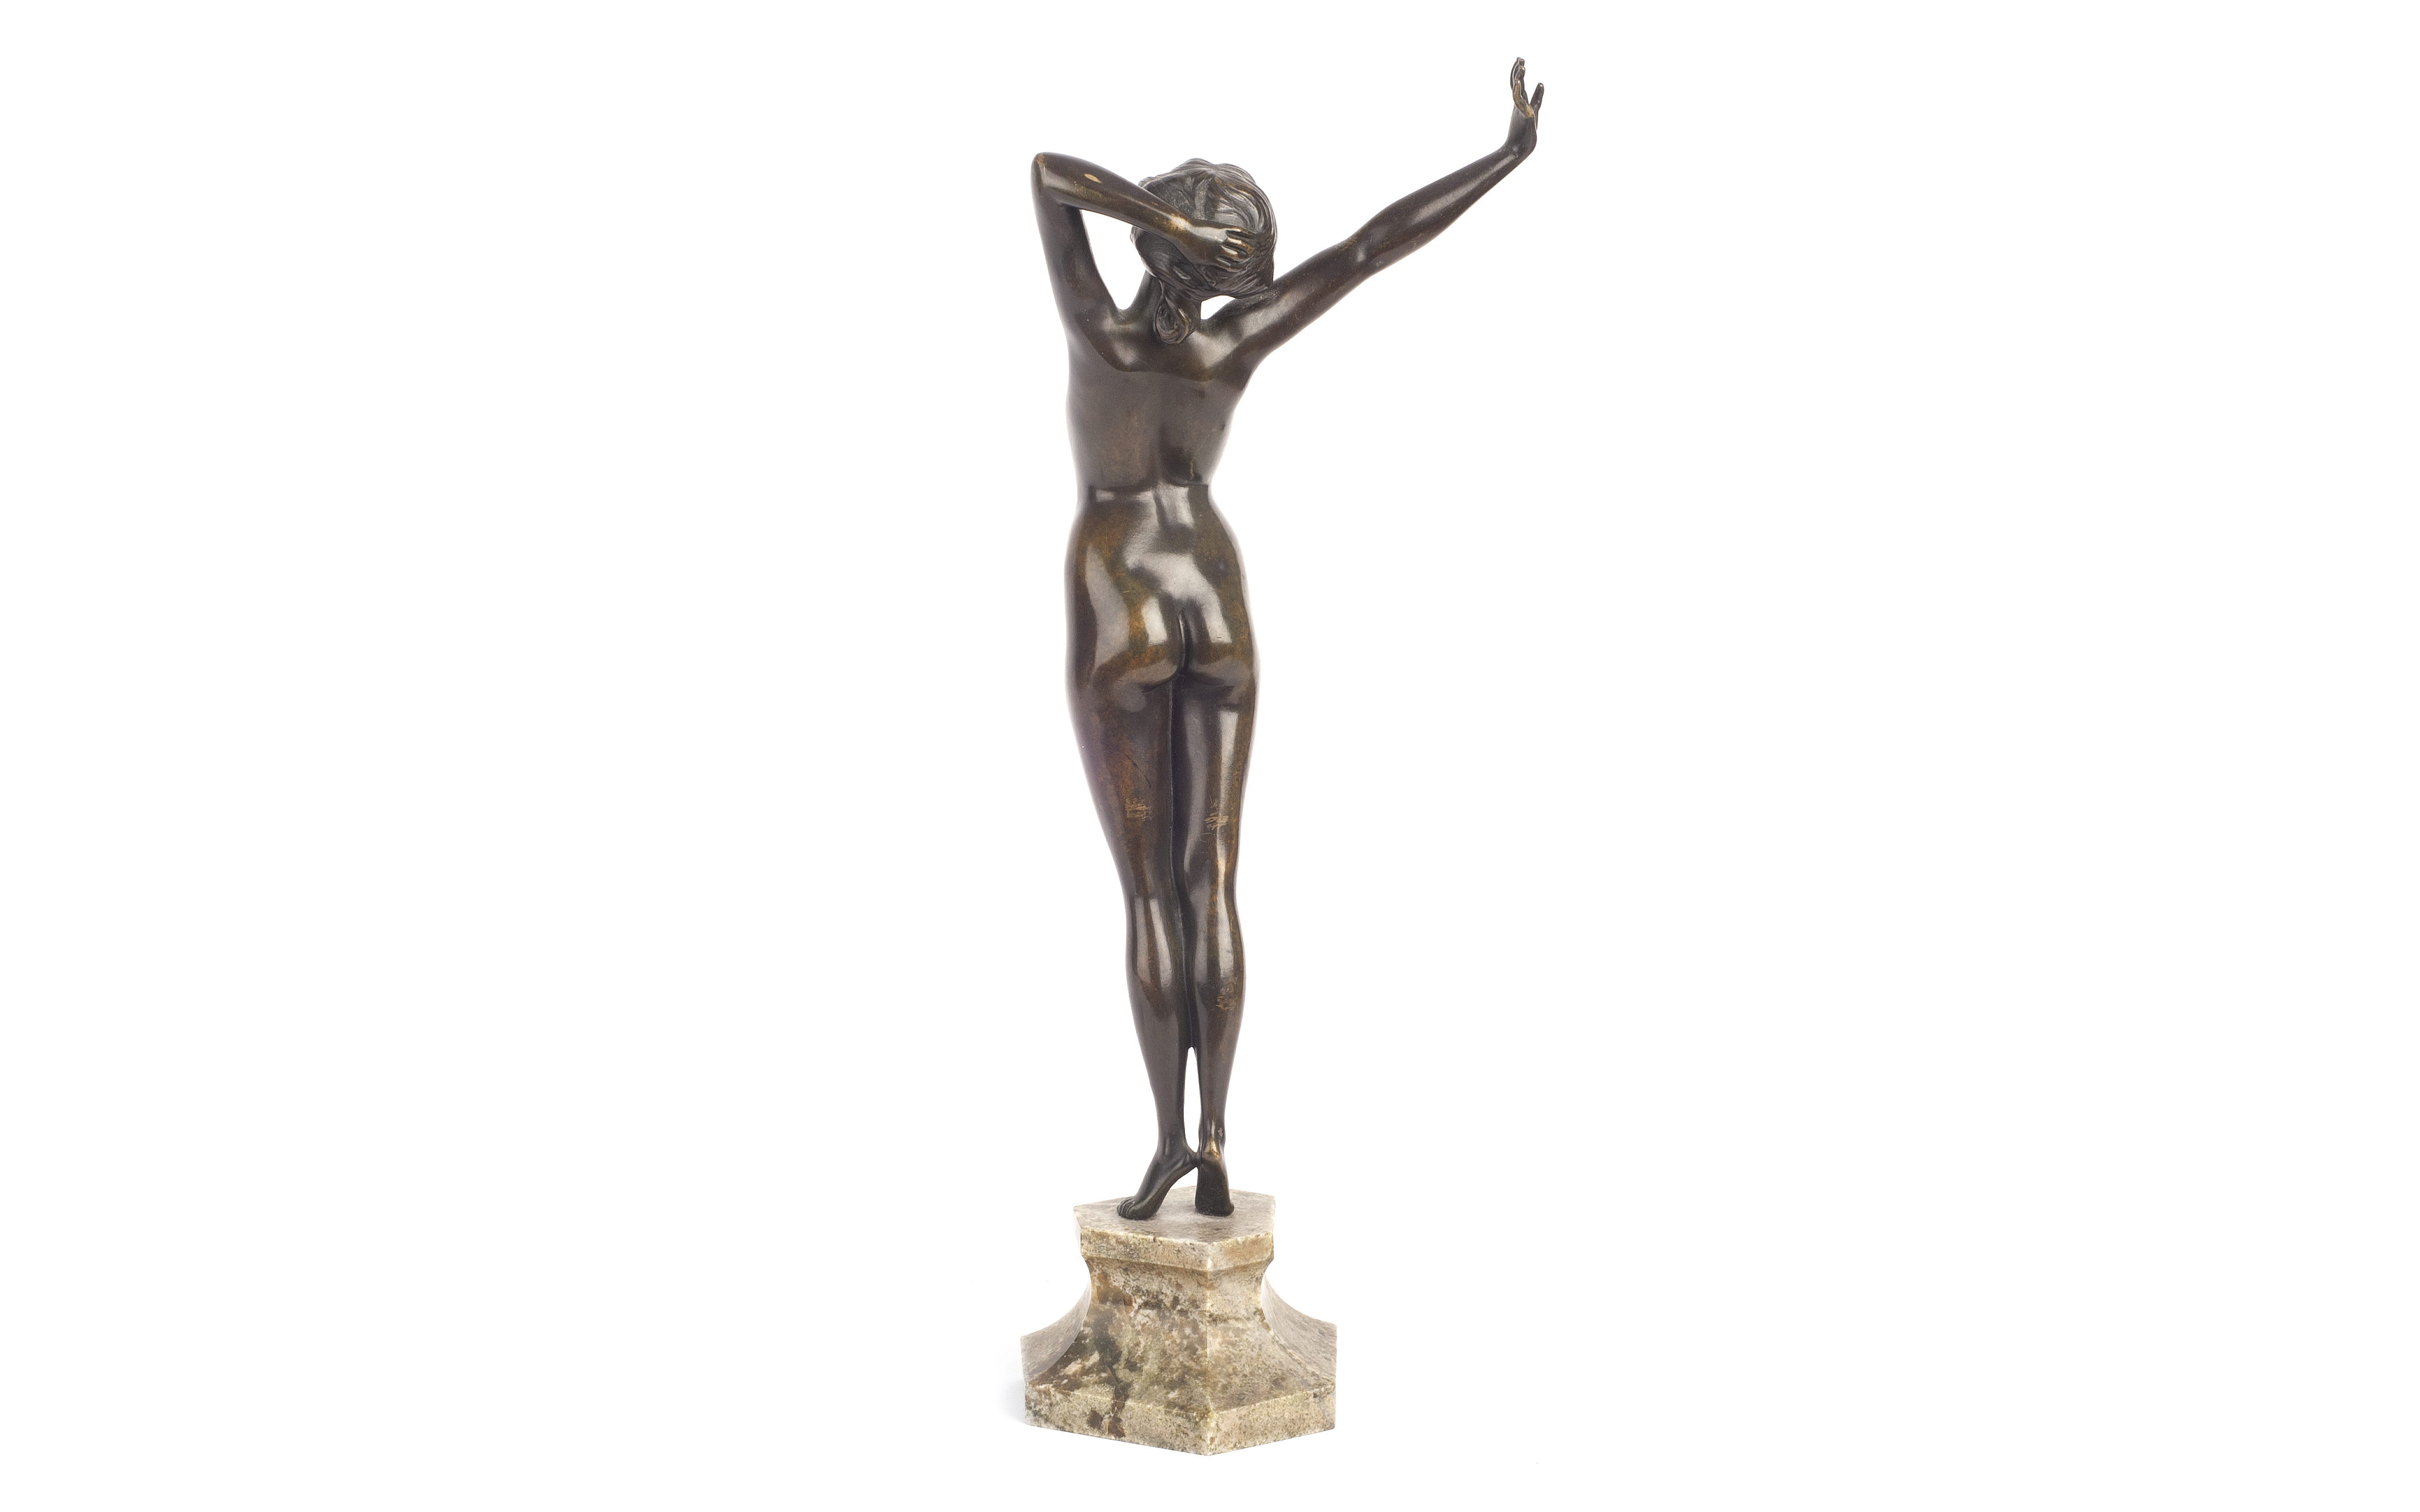 ATTRIBUTED TO PAUL PHILIPPE: AN ART DECO PERIOD BRONZE FIGURE OF 'THE AWAKENING' - Image 3 of 4